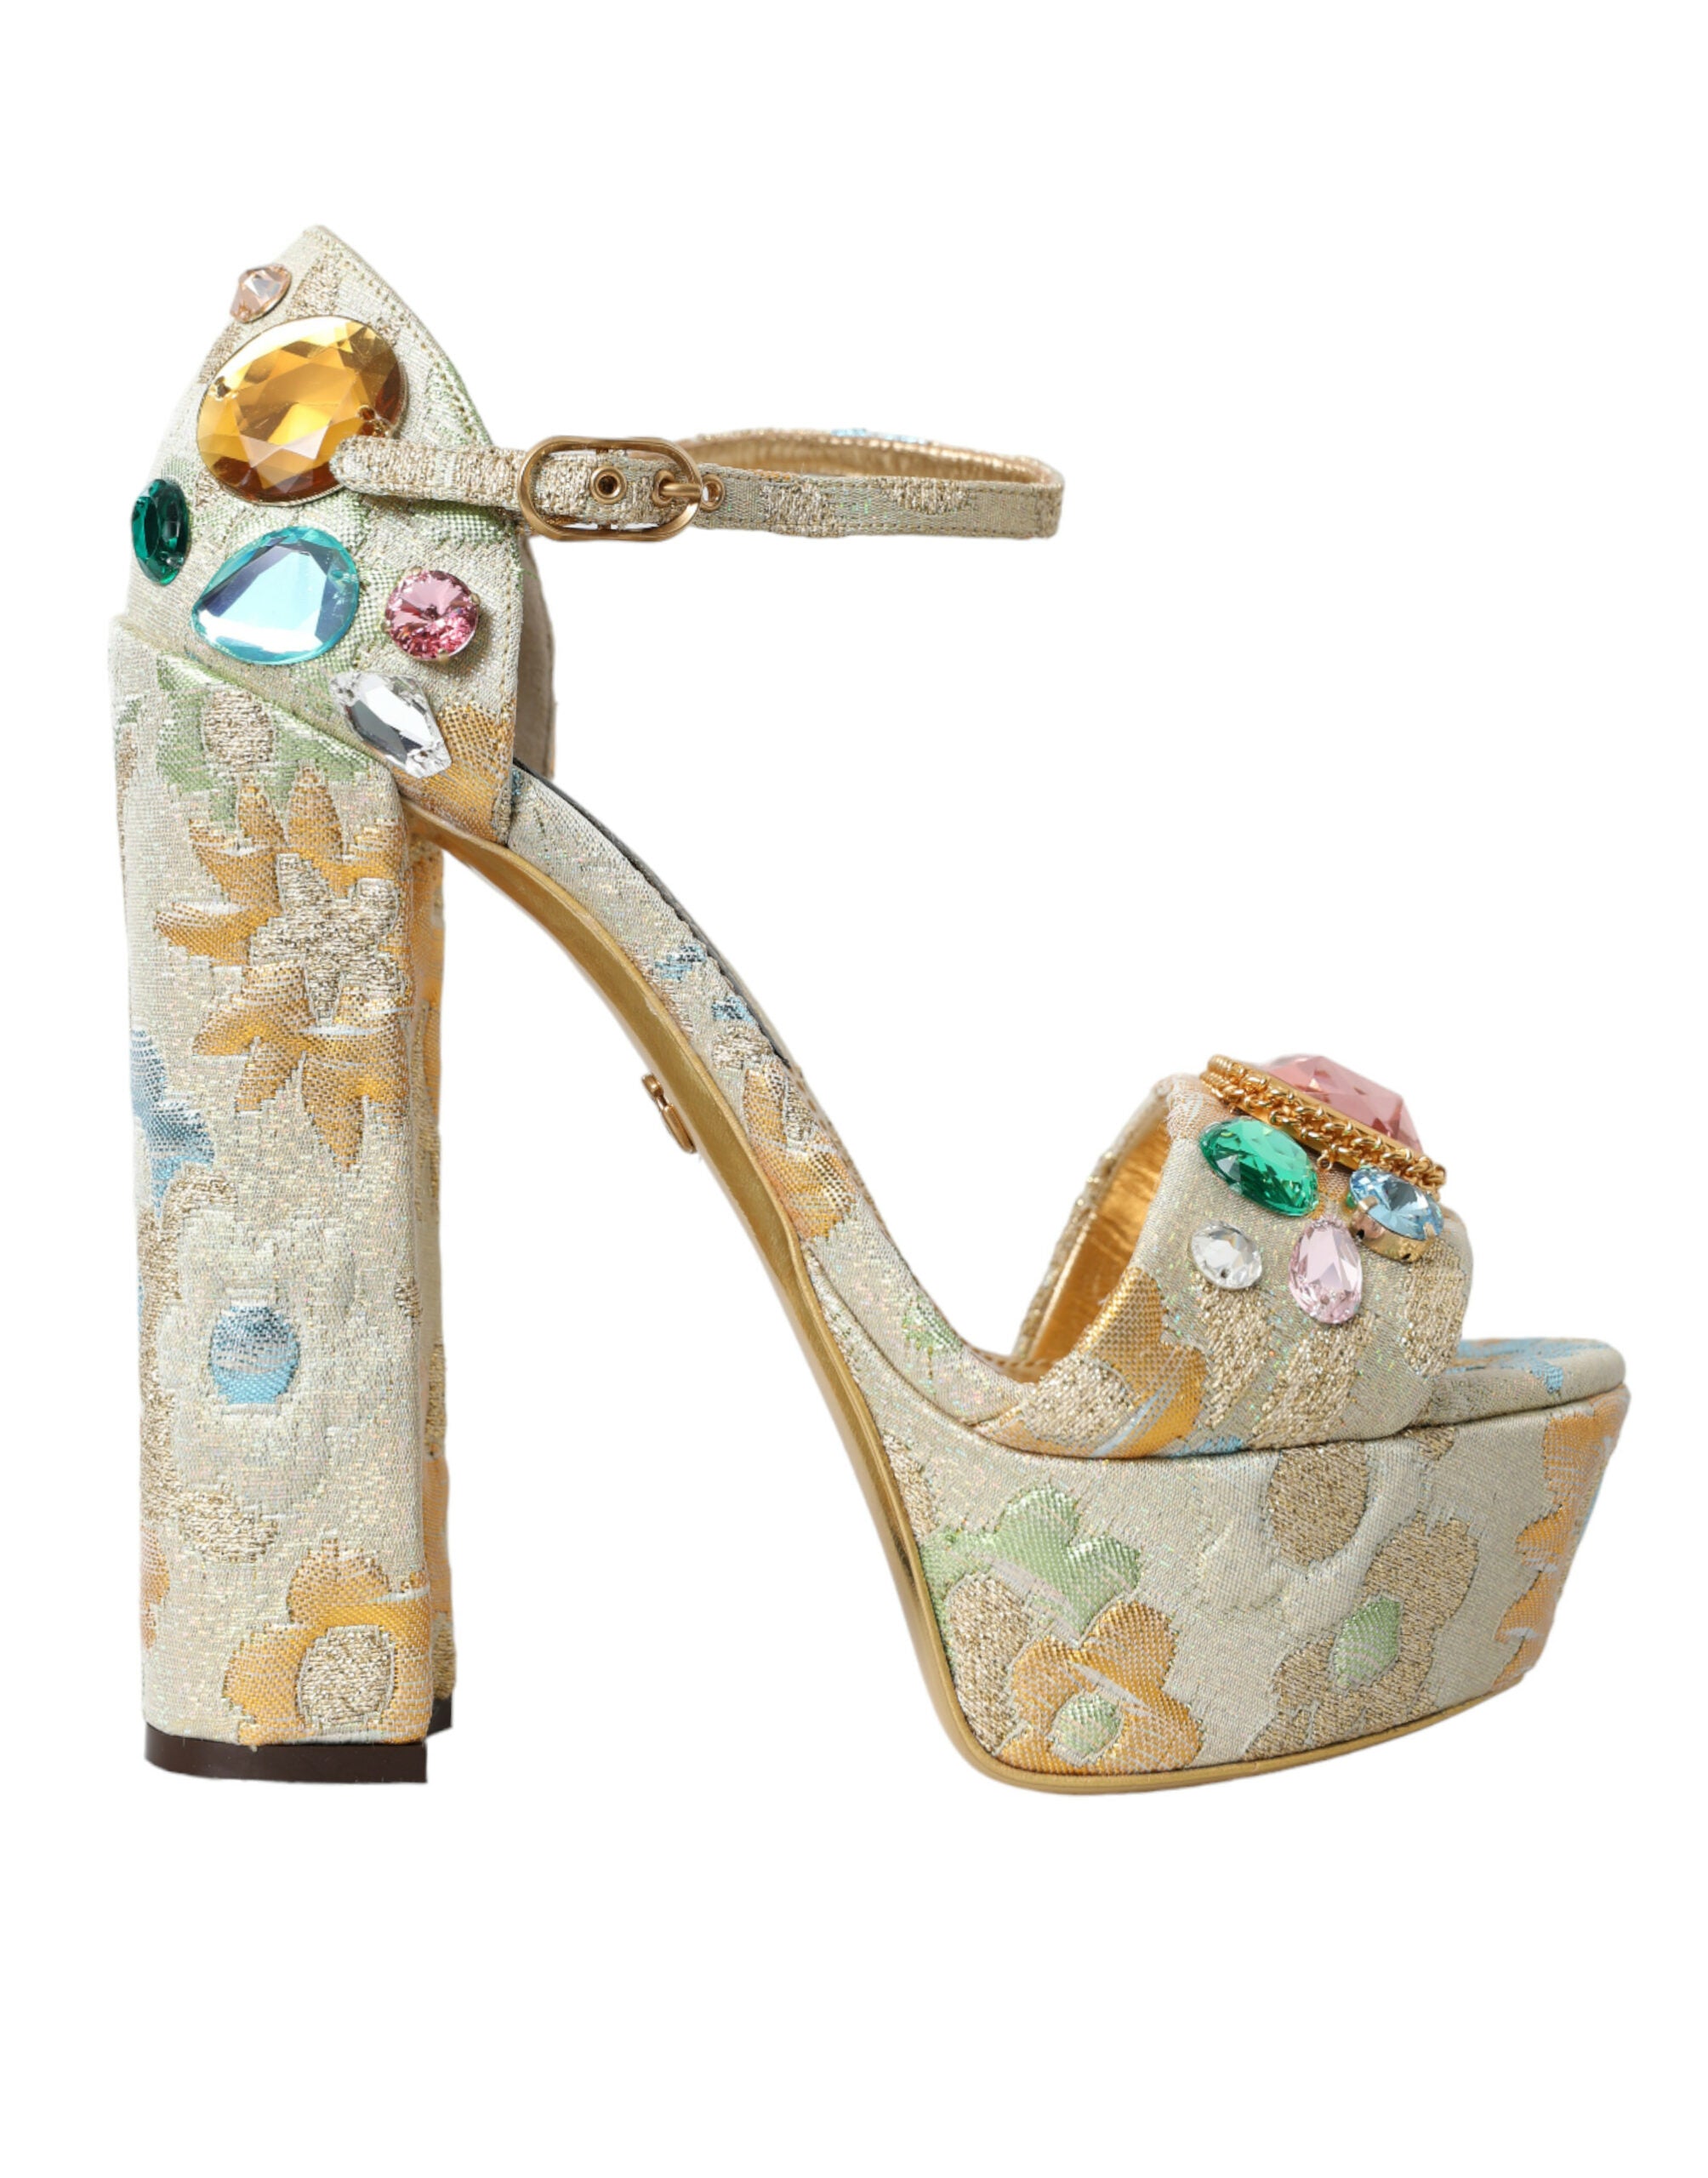 Gold Floral Jacquard Crystal Sandals Shoes - Divitiae Glamour